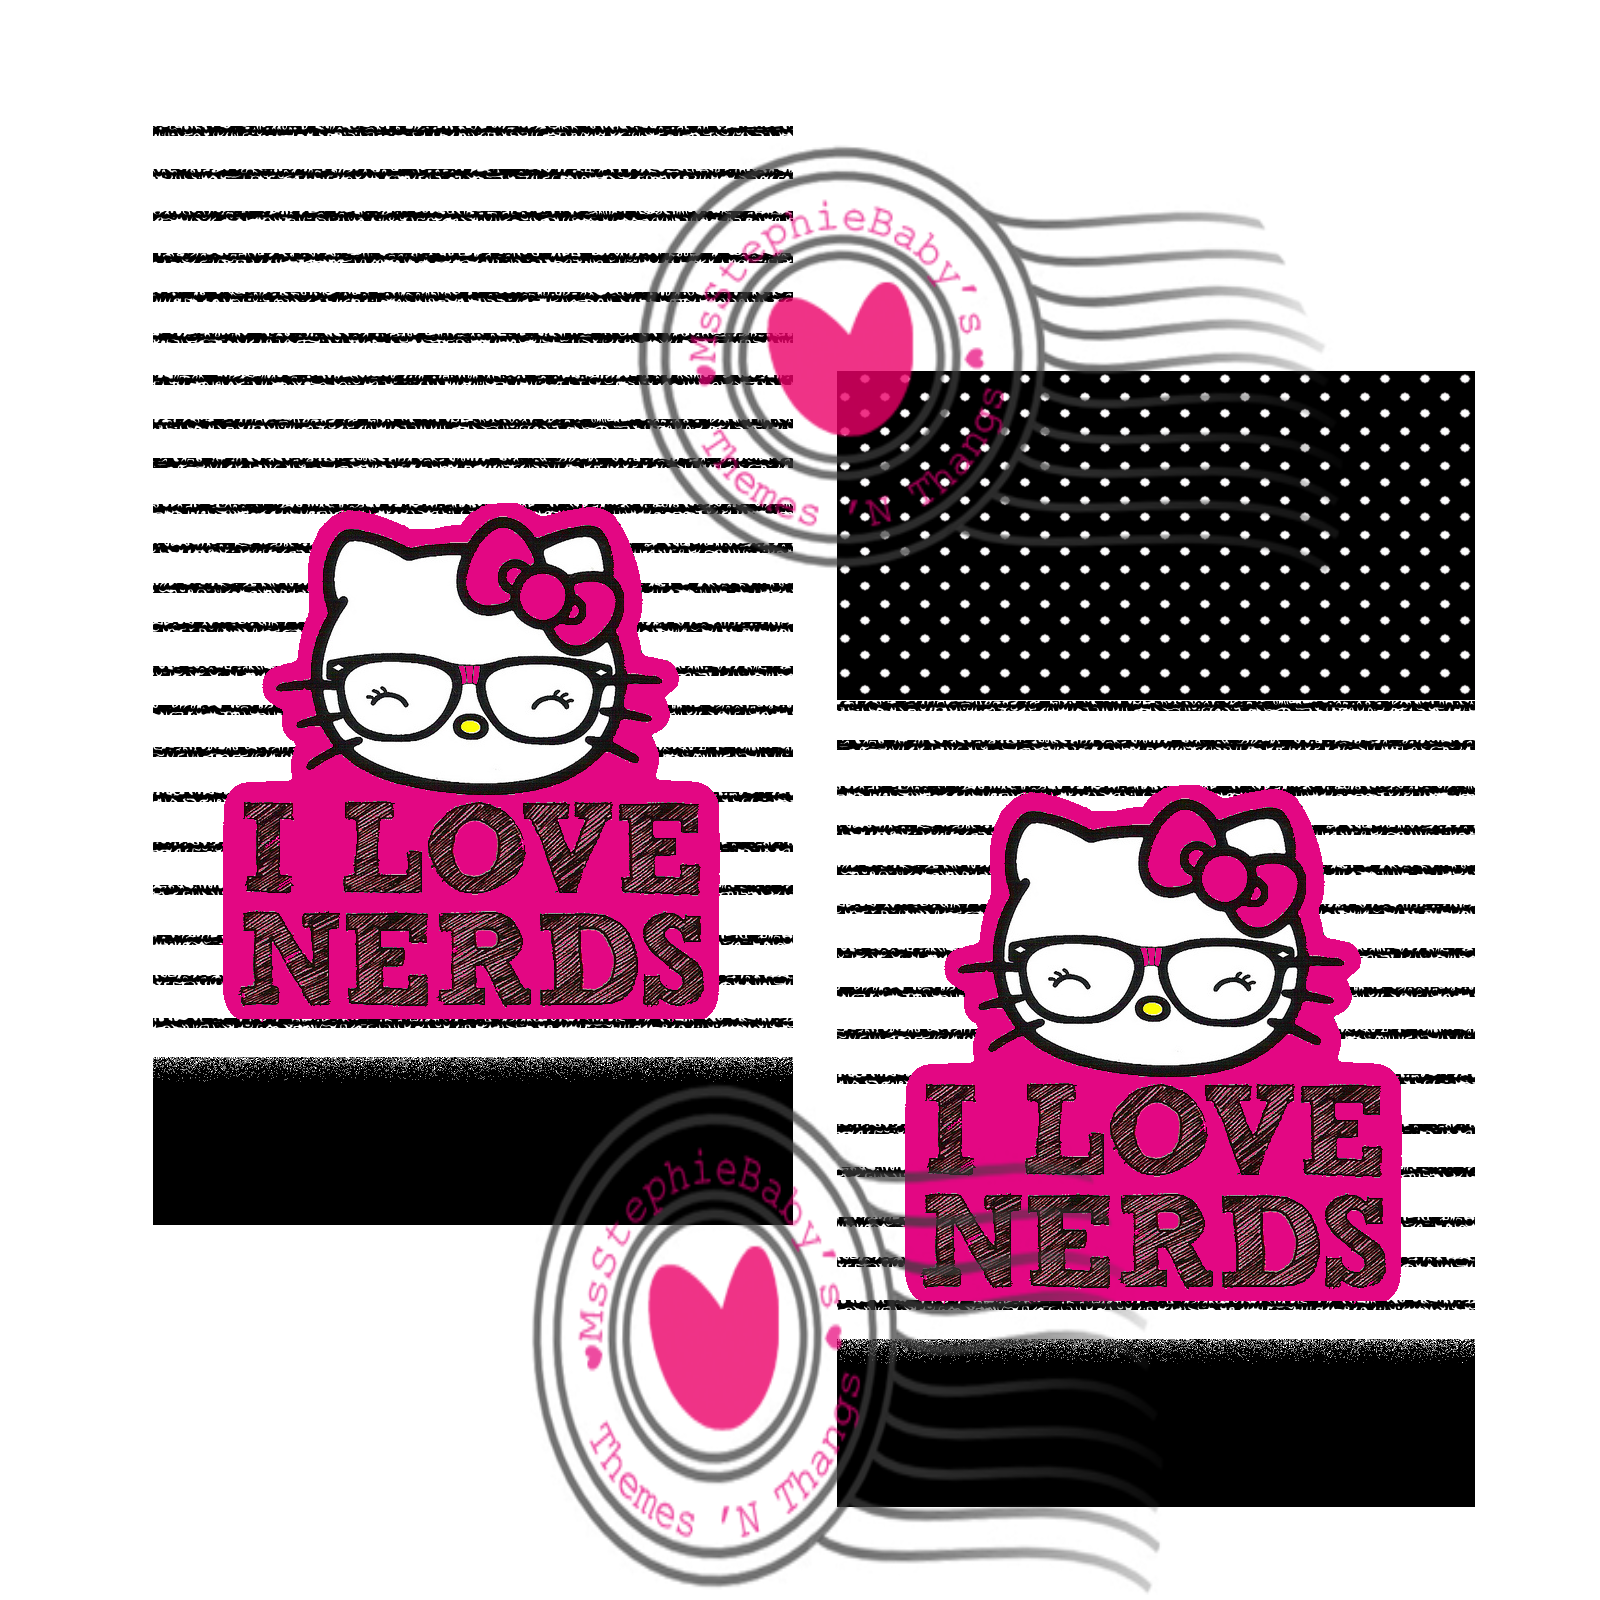 Media Imgs Hello Kitty Wallpaper For iPad Image Crazy Gallery